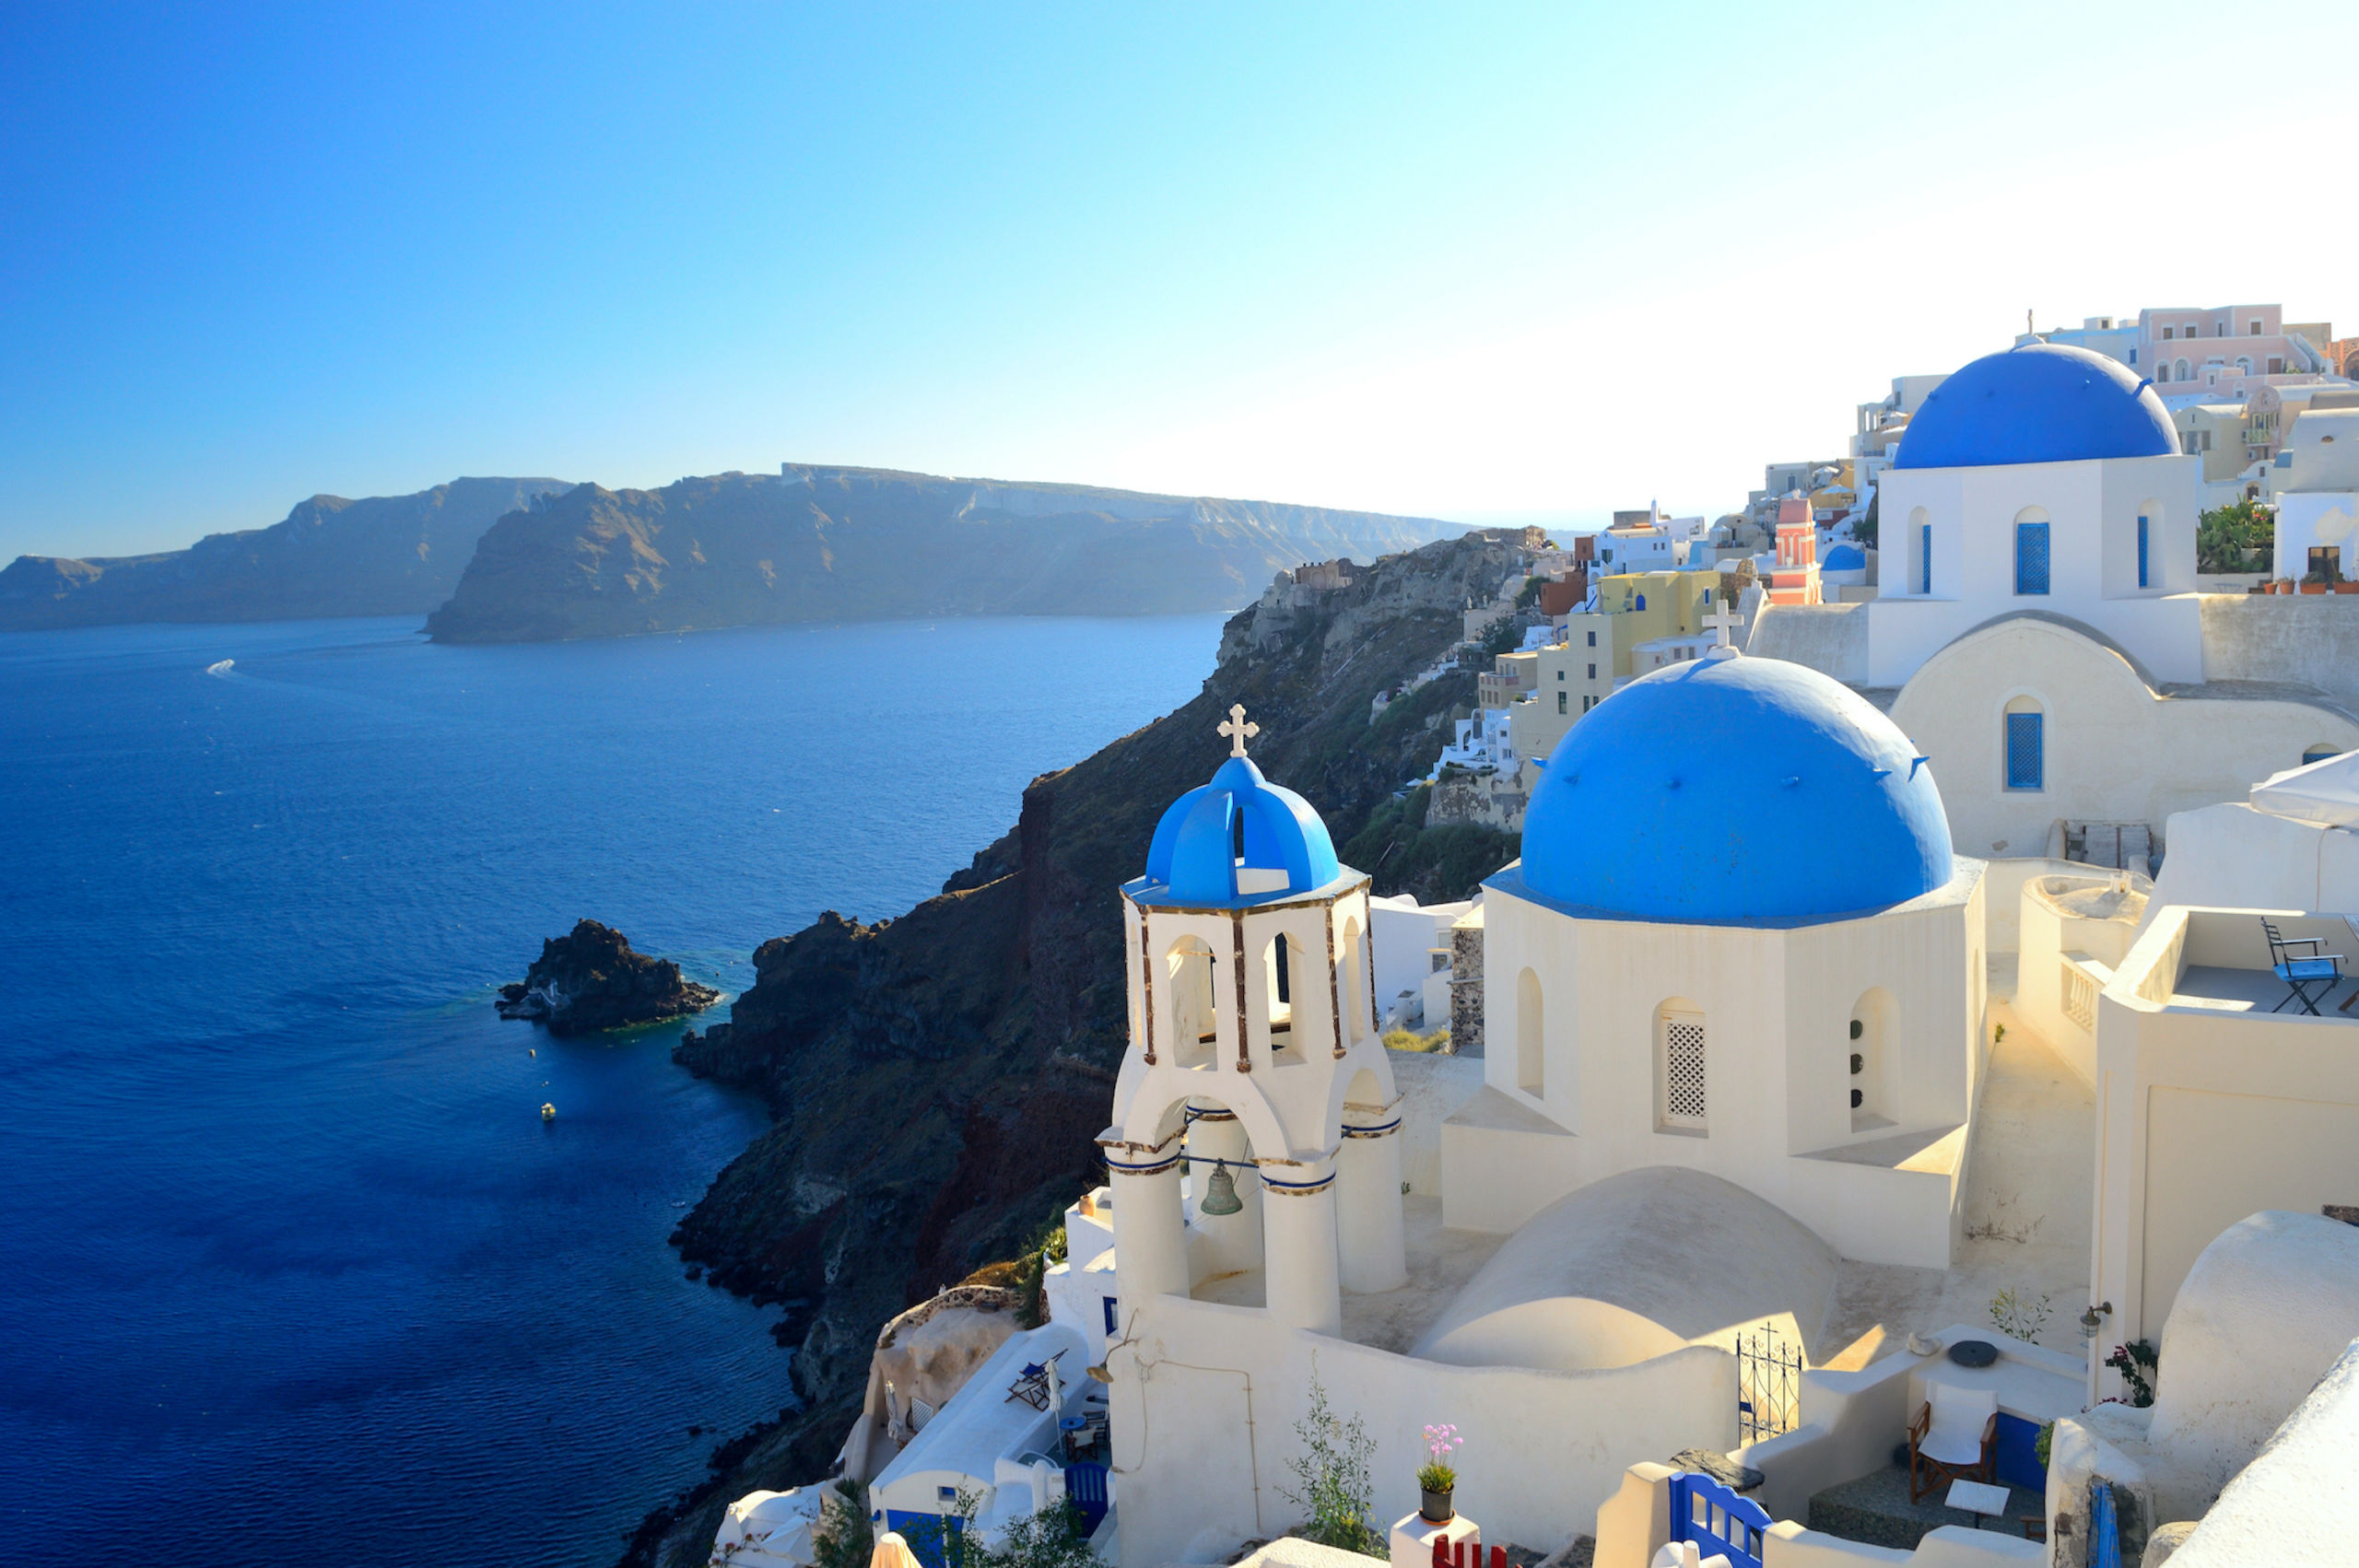 Santorini - the perfect destination for a luxury yacht charter in Greece